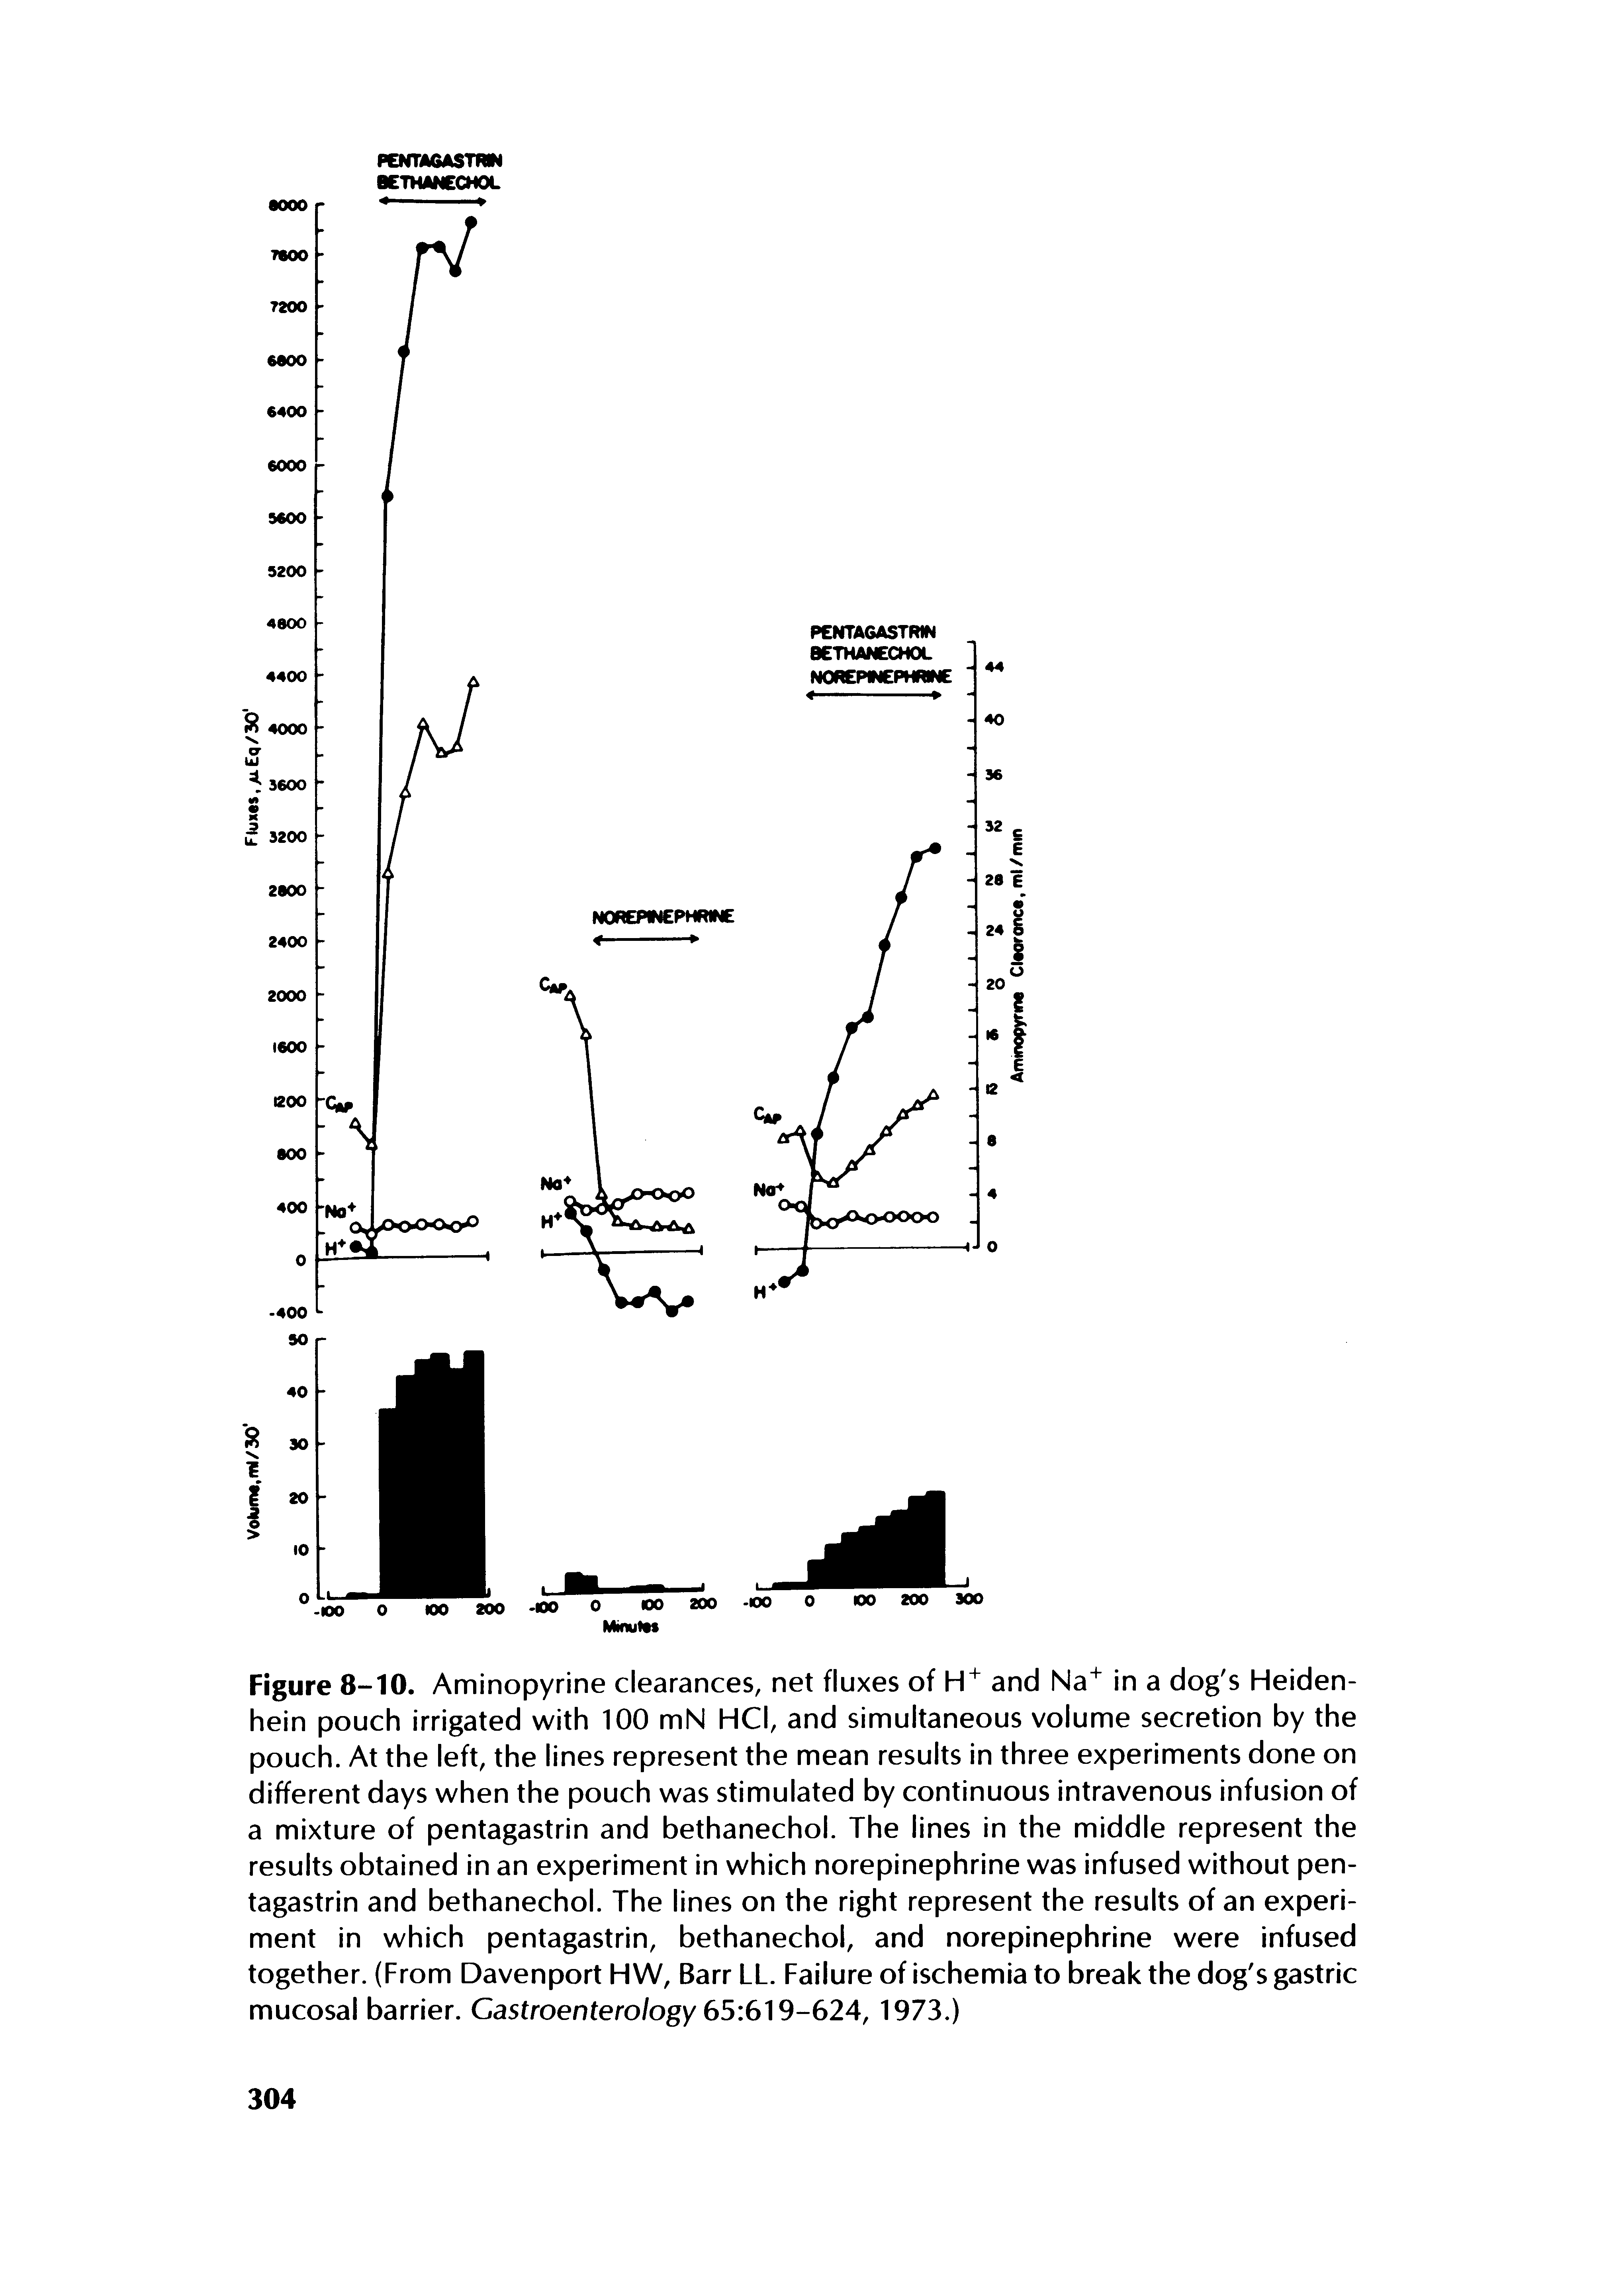 Figure 8-10. Aminopyrine clearances, net fluxes of and Na" in a dog s Heiden-hein pouch irrigated with 100 mN HCI, and simultaneous volume secretion by the pouch. At the left, the lines represent the mean results in three experiments done on different days when the pouch was stimulated by continuous intravenous infusion of a mixture of pentagastrin and bethanechol. The lines in the middle represent the results obtained in an experiment in which norepinephrine was infused without pentagastrin and bethanechol. The lines on the right represent the results of an experiment in which pentagastrin, bethanechol, and norepinephrine were infused together. (From Davenport HW, Barr LL. Failure of ischemia to break the dog s gastric mucosal barrier. Gastroenterology 65 6 9-624, 1973.)...